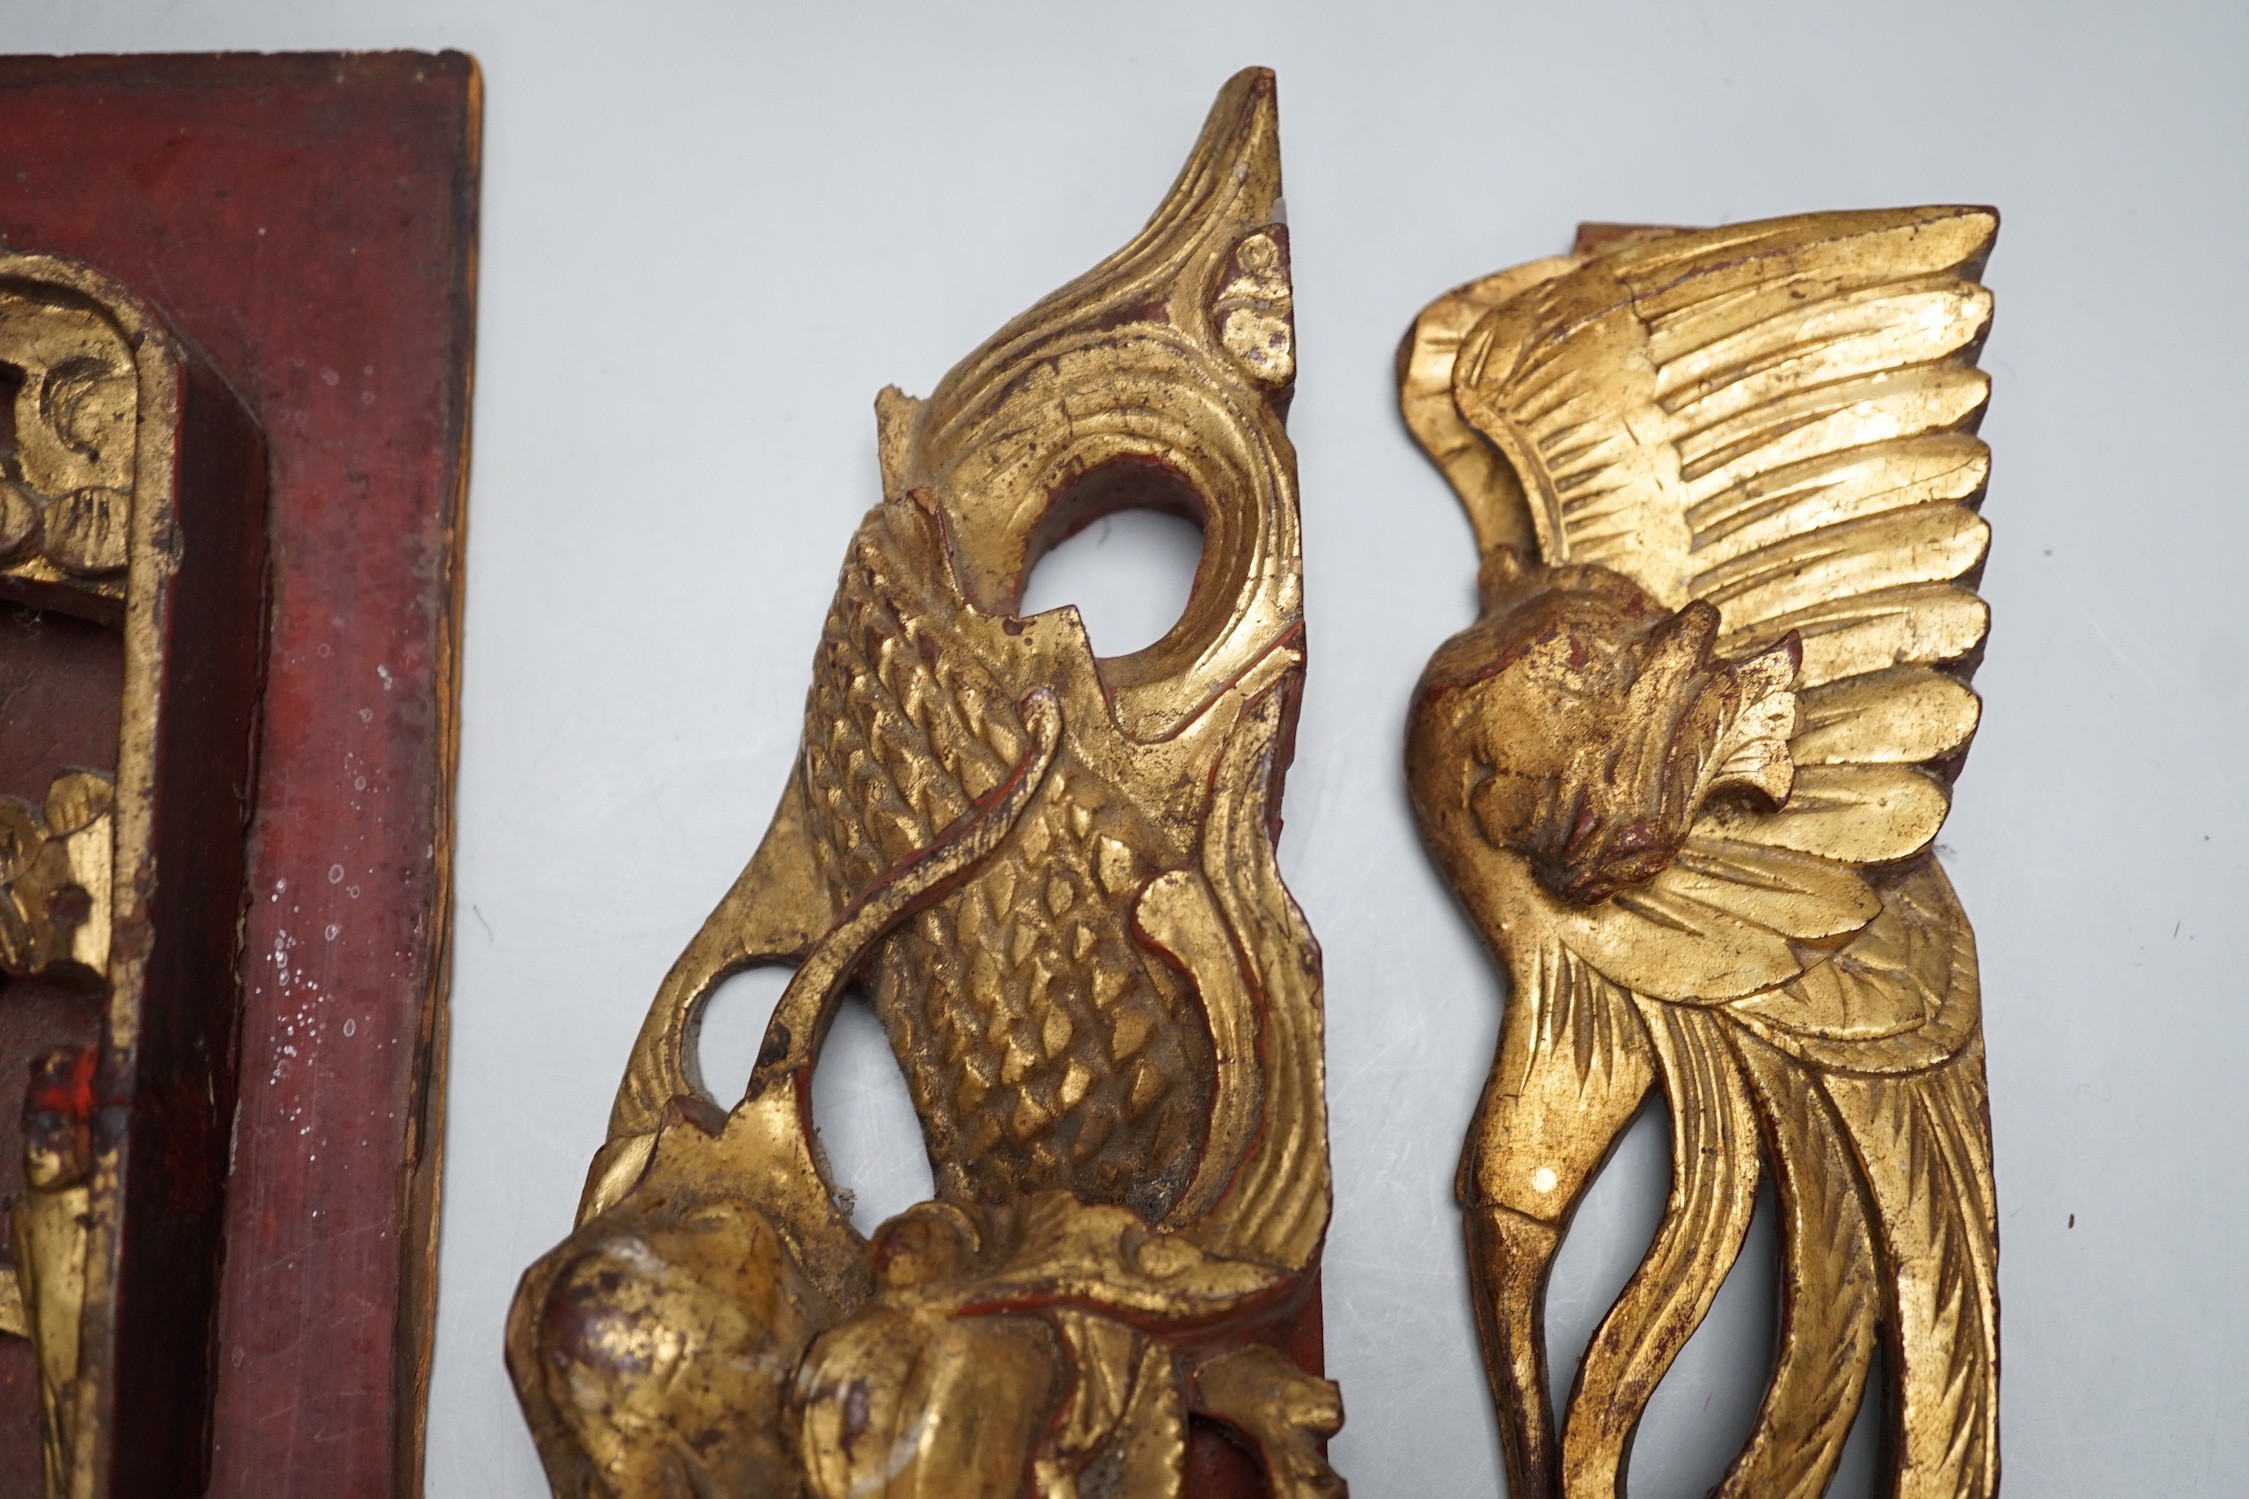 Three Chinese gilded and lacquered wood figural panels and two similar dragon and phoenix crest pieces (5), late 19th century